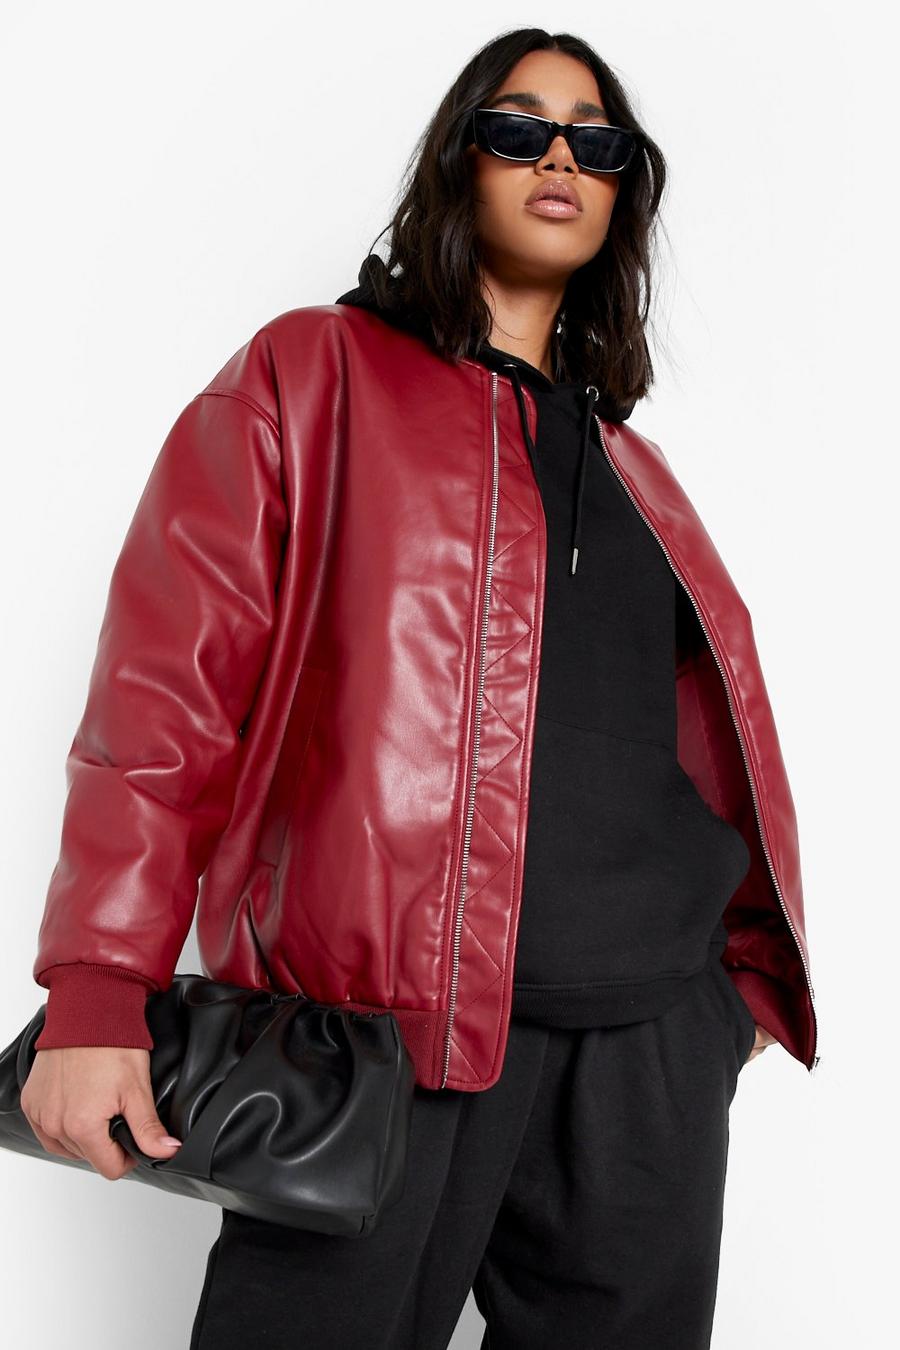 Giacca Bomber oversize in pelle sintetica, Maroon rosso